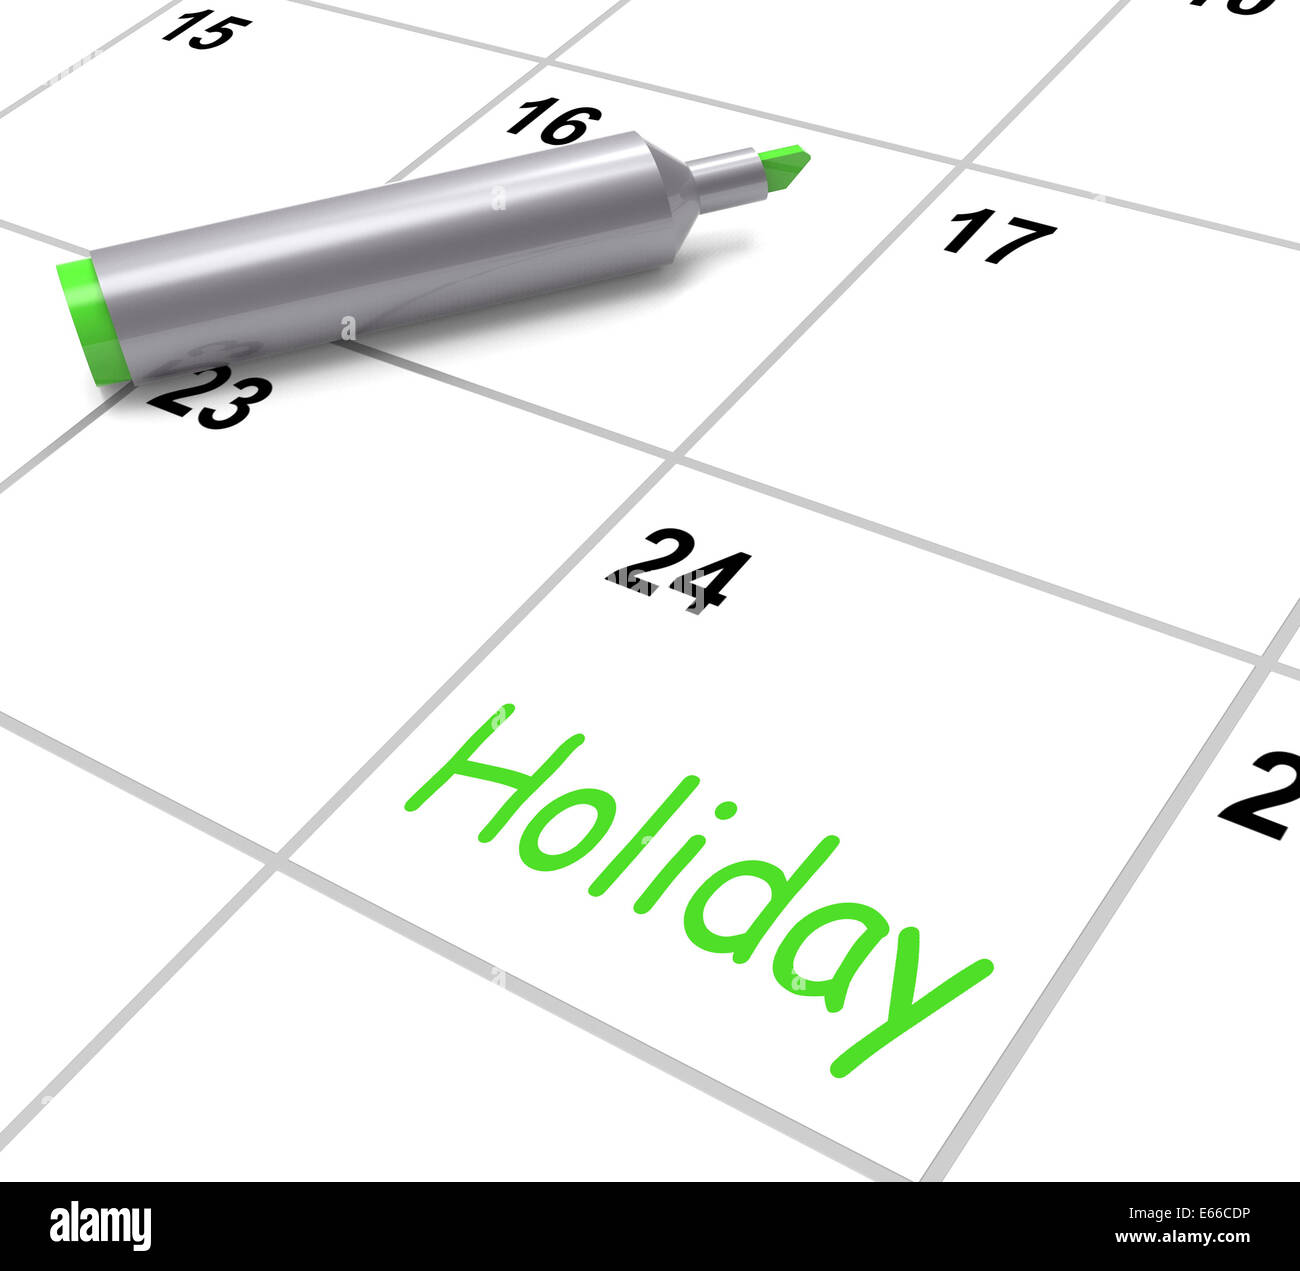 Holiday Calendar Showing Rest Day And Break From Work Stock Photo